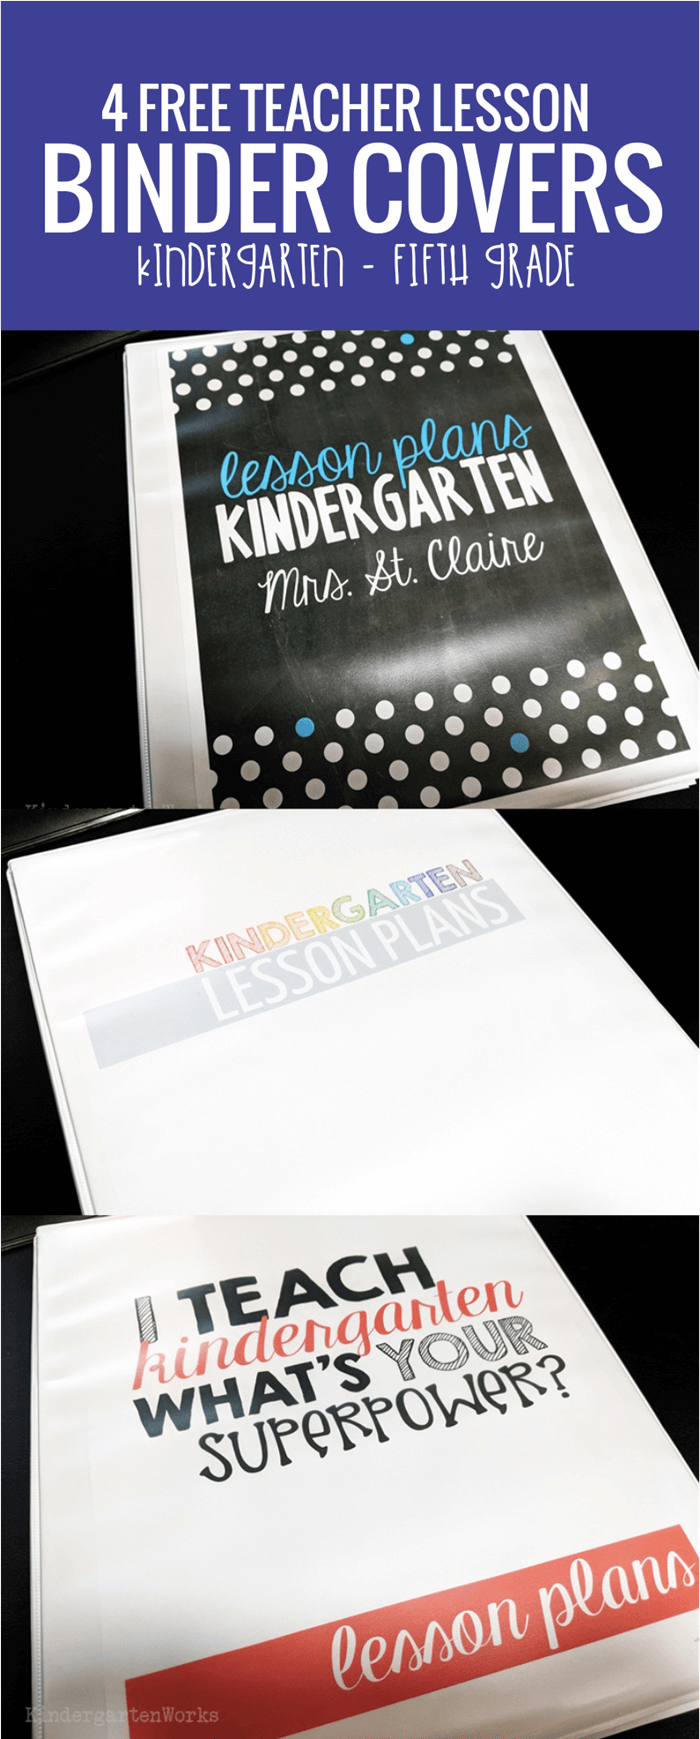 4 Free Teacher Lesson Planning Binder Covers